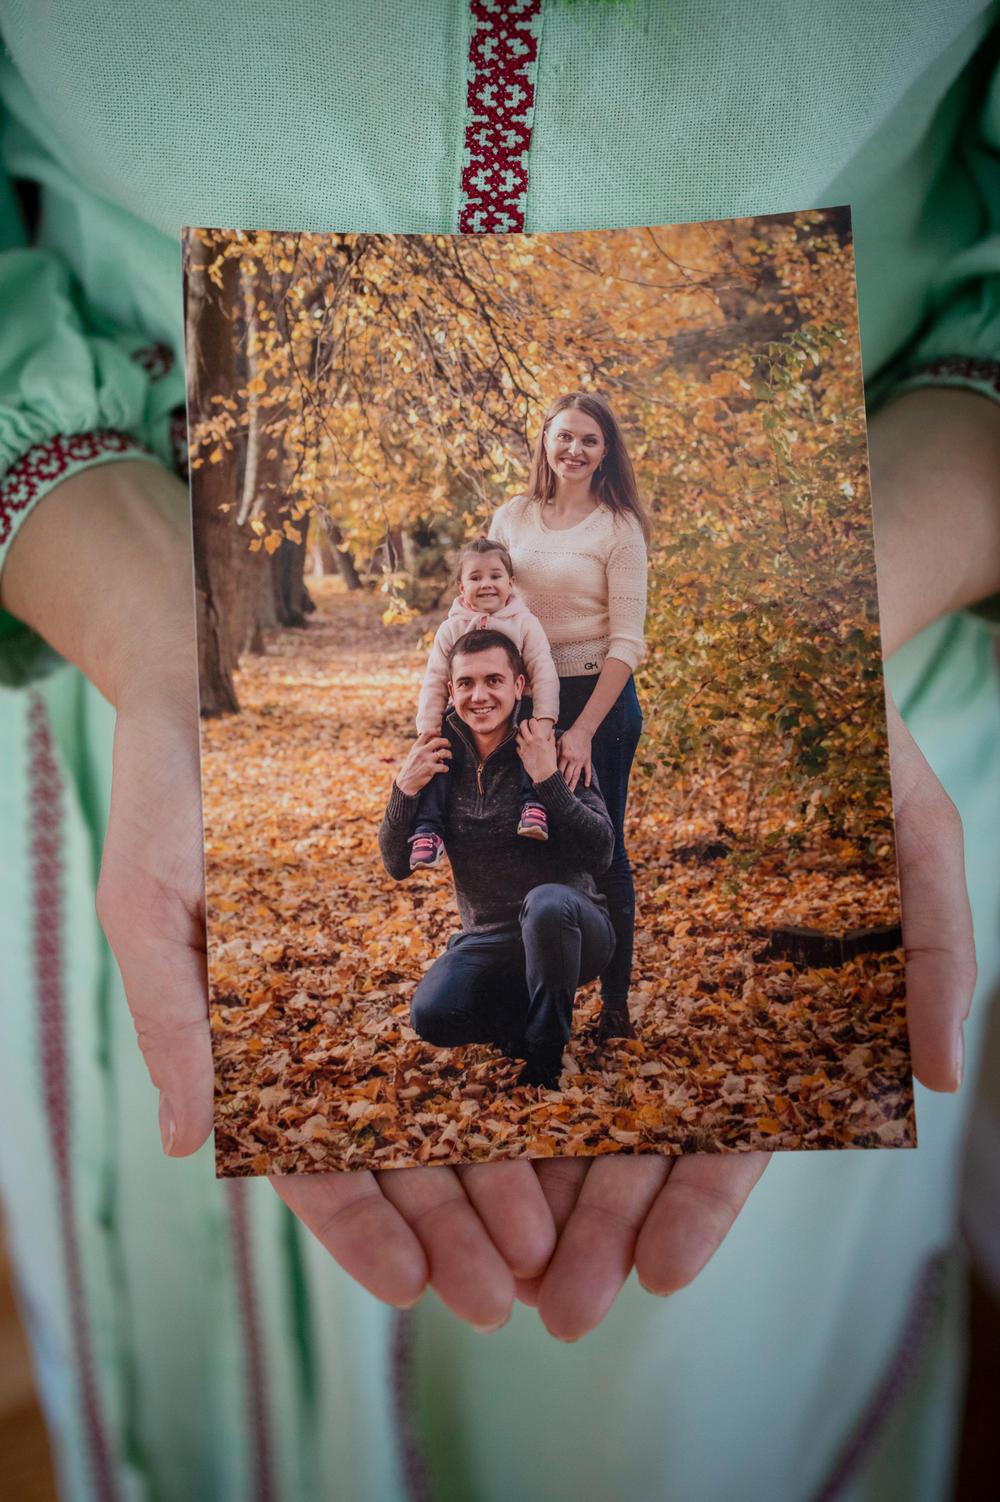 Olha Abakumova and her daughter Zlata, 8, recently immigrated to the U.S. from Ukraine. She's holding a family photo that shows her husband, Ihor, a tubaist with a symphony orchestra, who remains in Ukraine. Men ages 18 to 60 are as a rule not able to leave because they may be needed for military service.